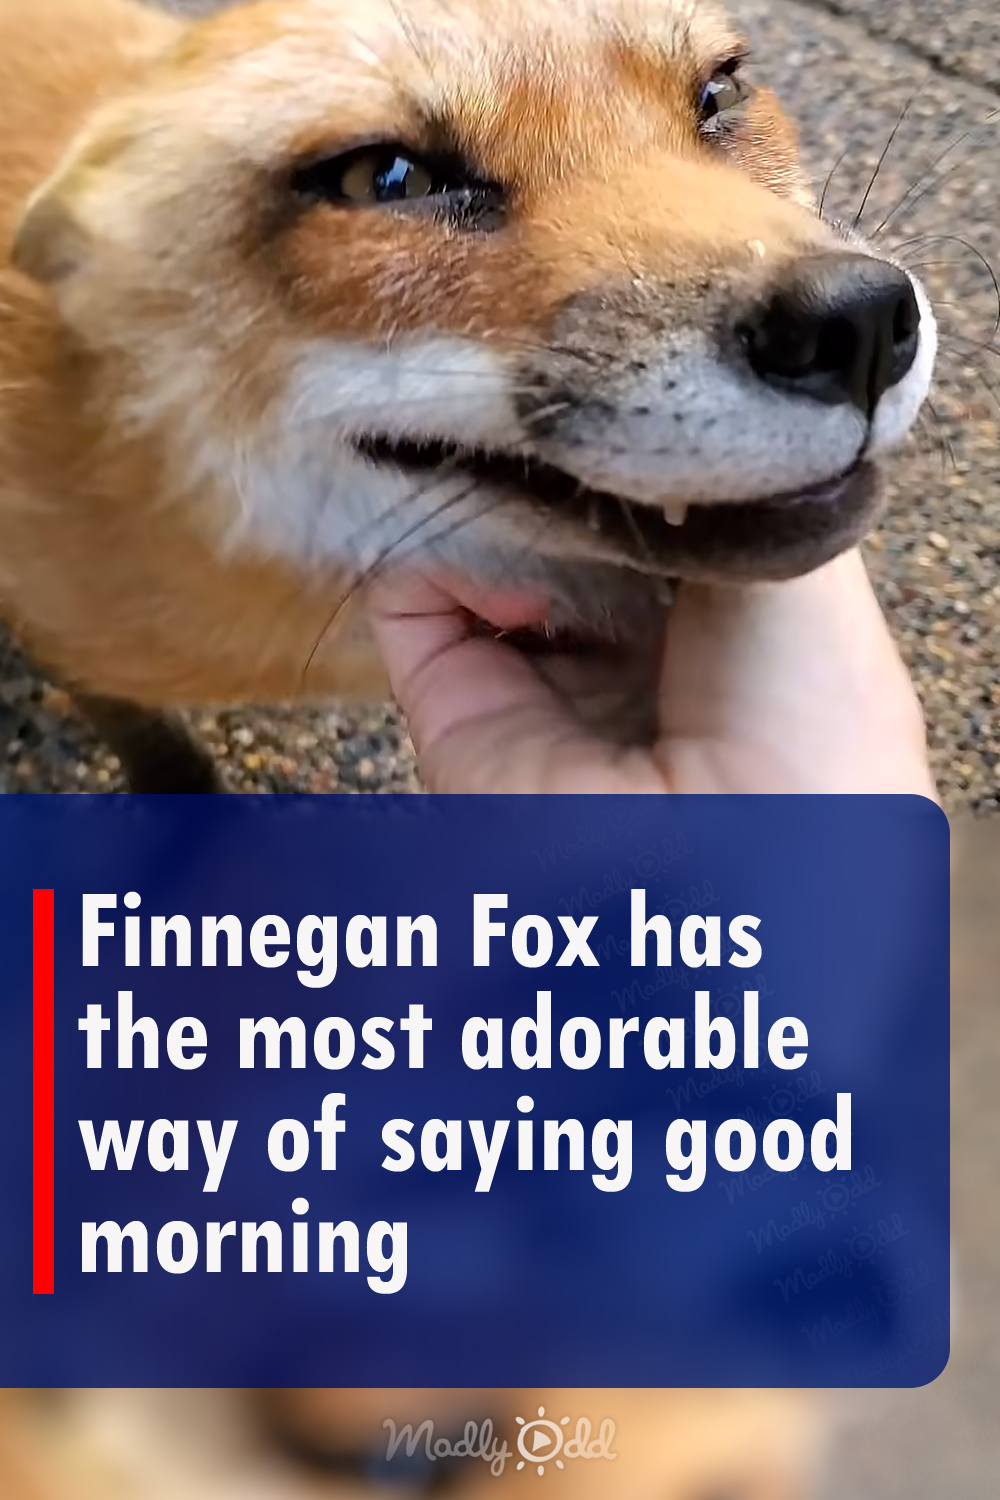 Finnegan Fox has the most adorable way of saying good morning